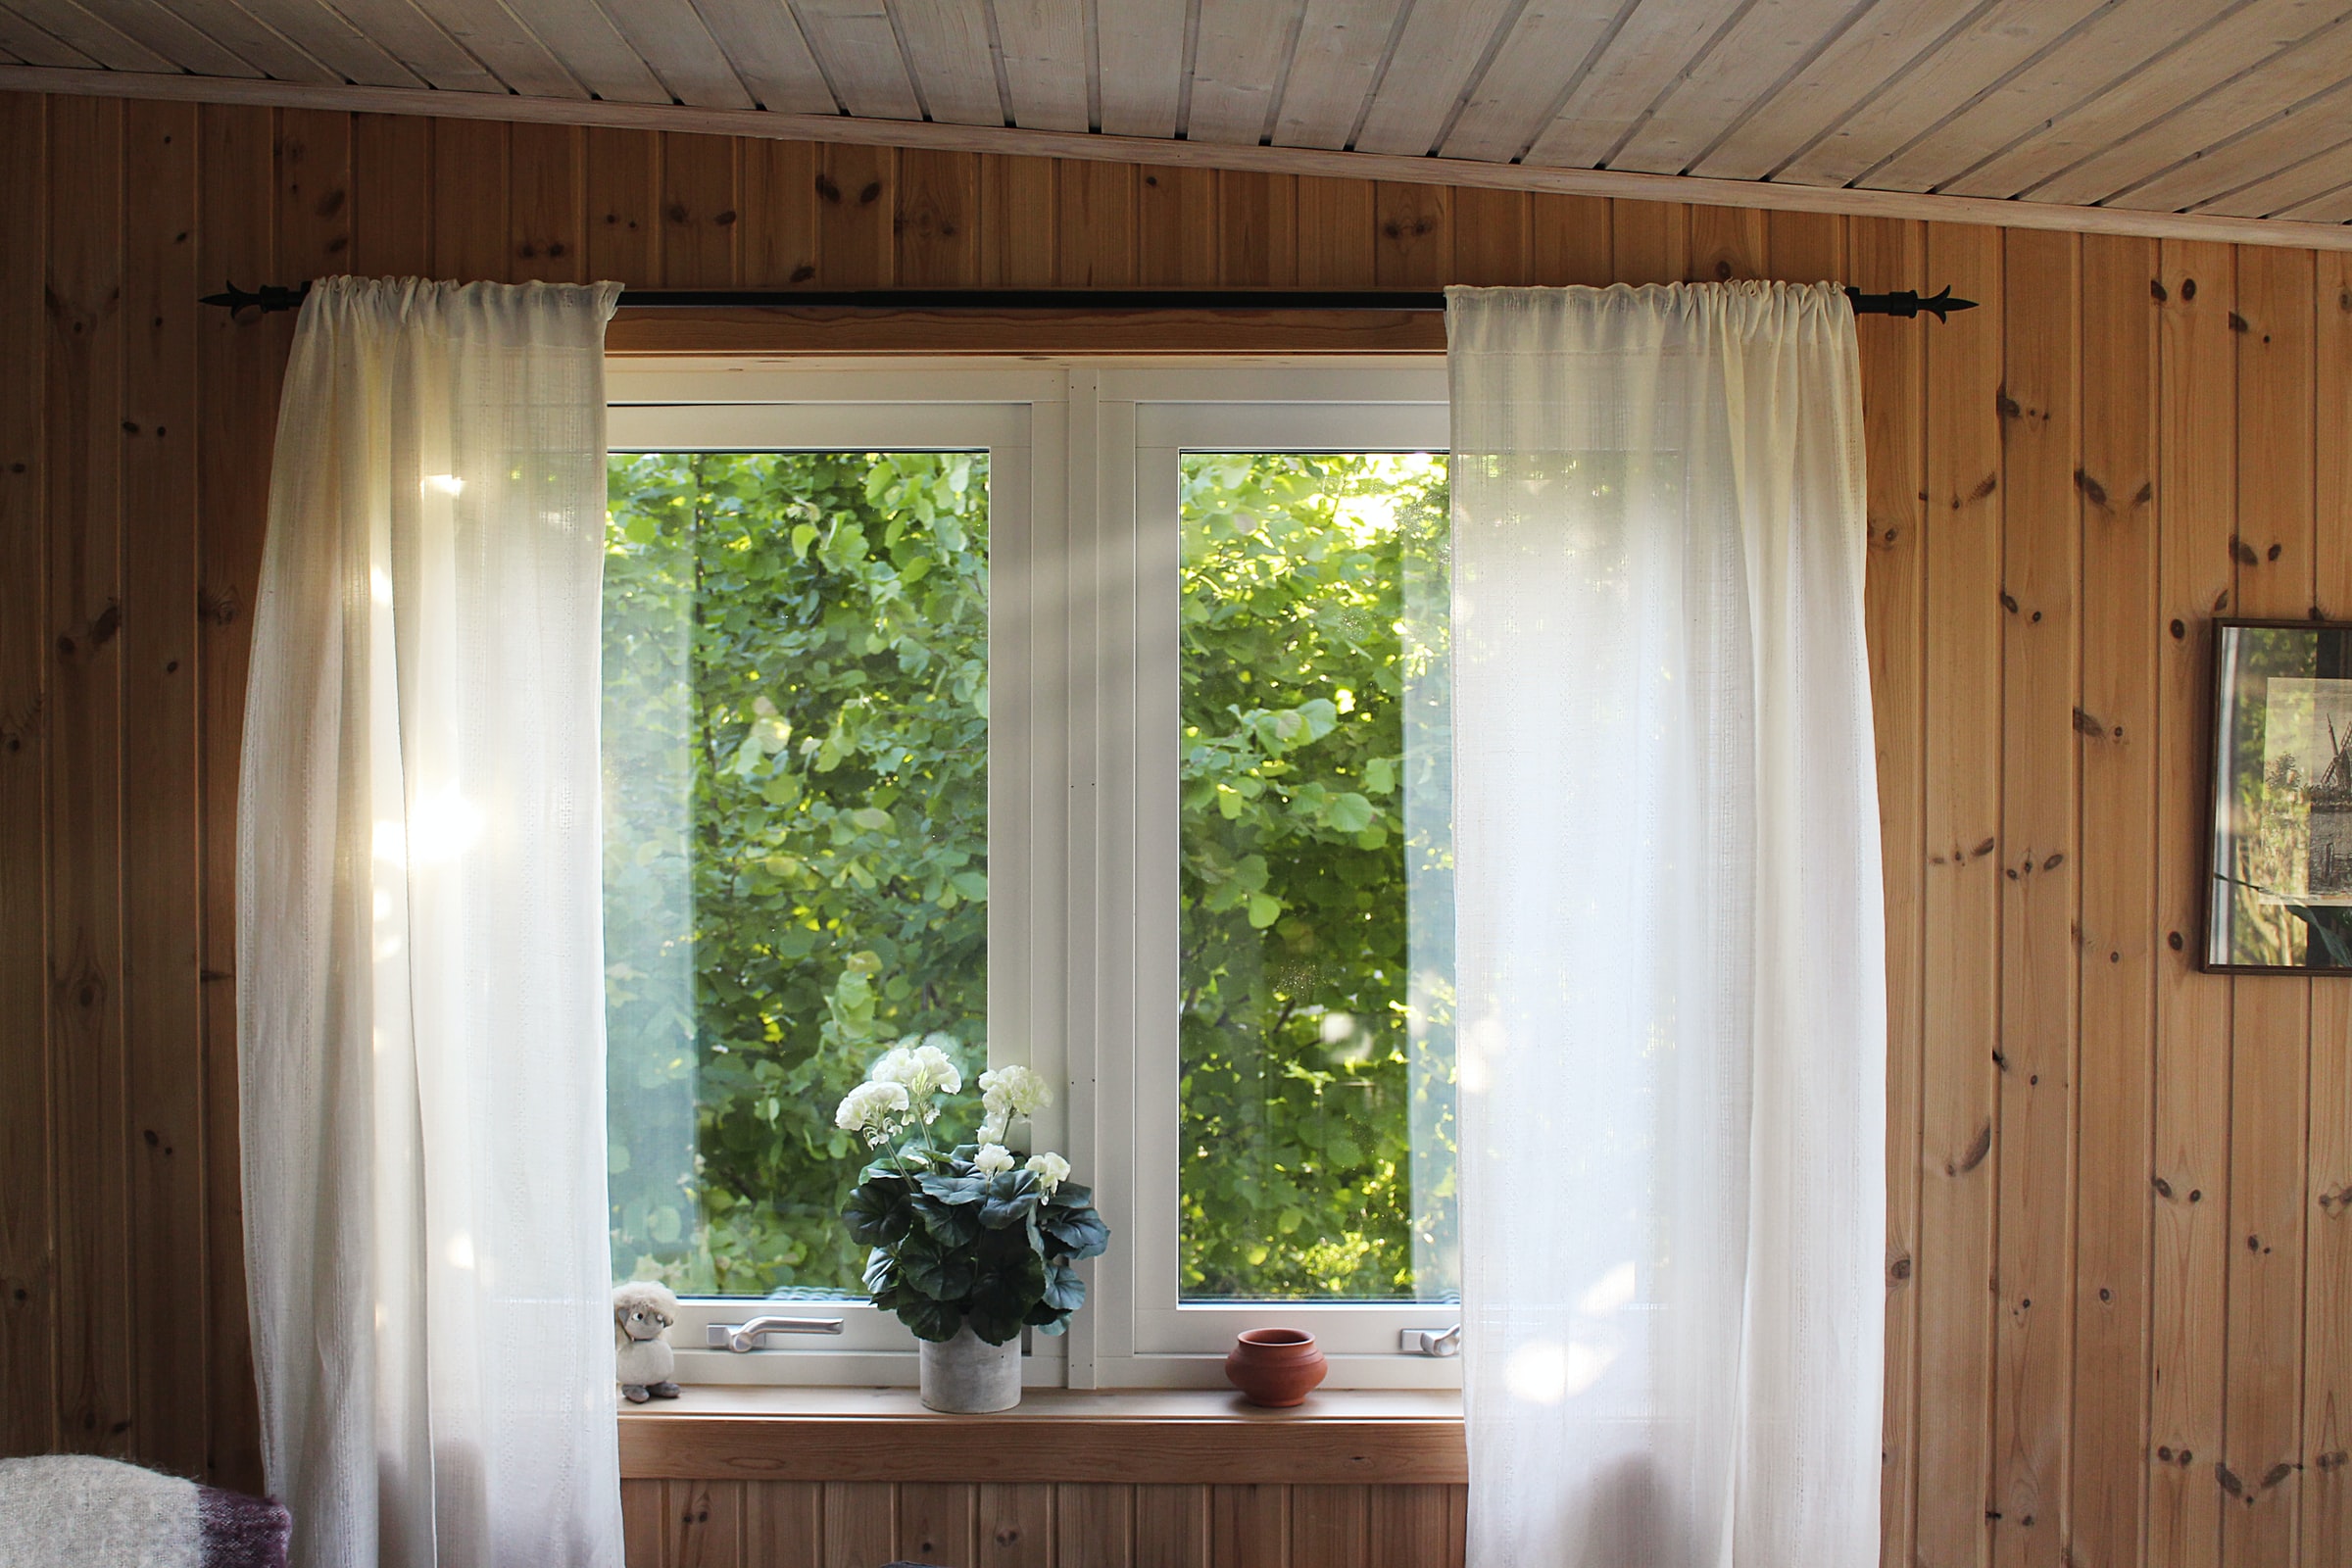 Window looking out into trees. There are white curtains on both sides of the window. The window sill has an orange bowl and a flower vase on it.